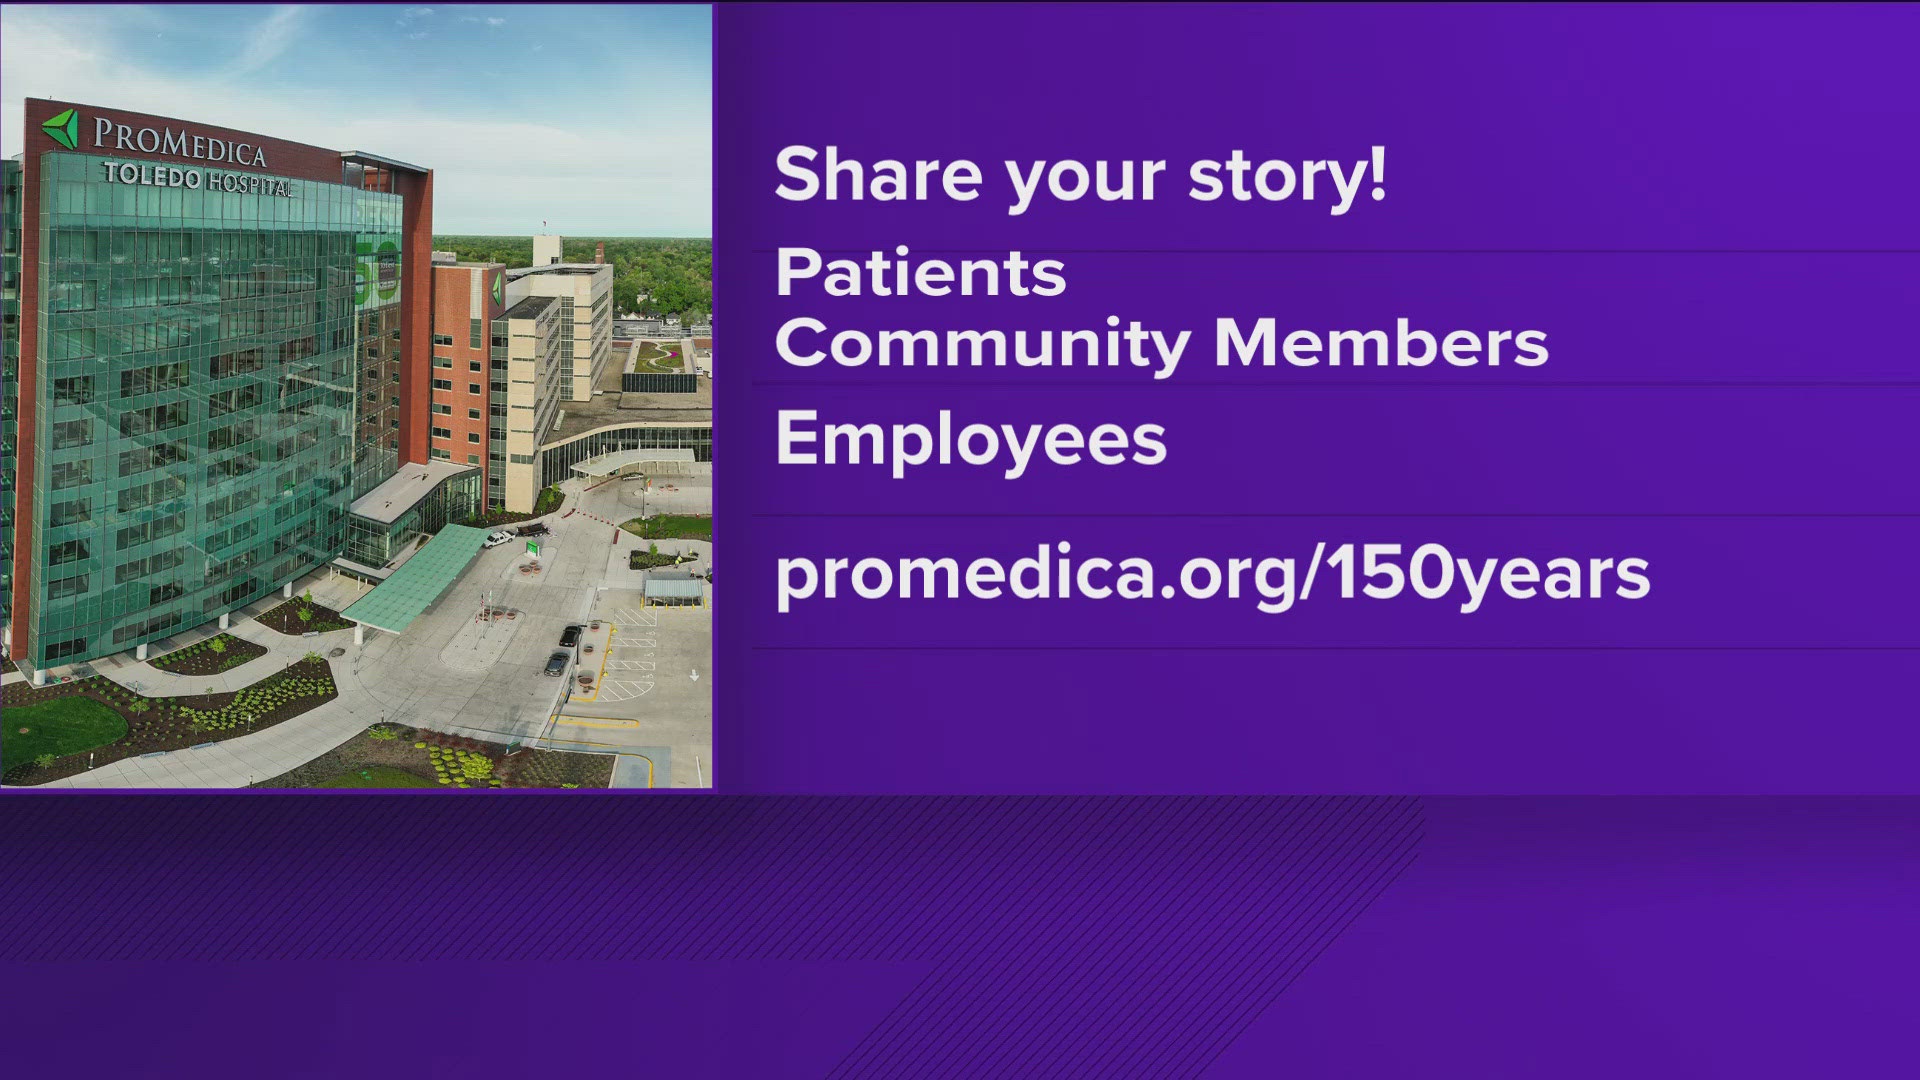 Liz Michalak with ProMedica Toledo Hospital talks with Dan Cummins about the history of Toledo Hospital as it celebrates its 150th anniversary this year.